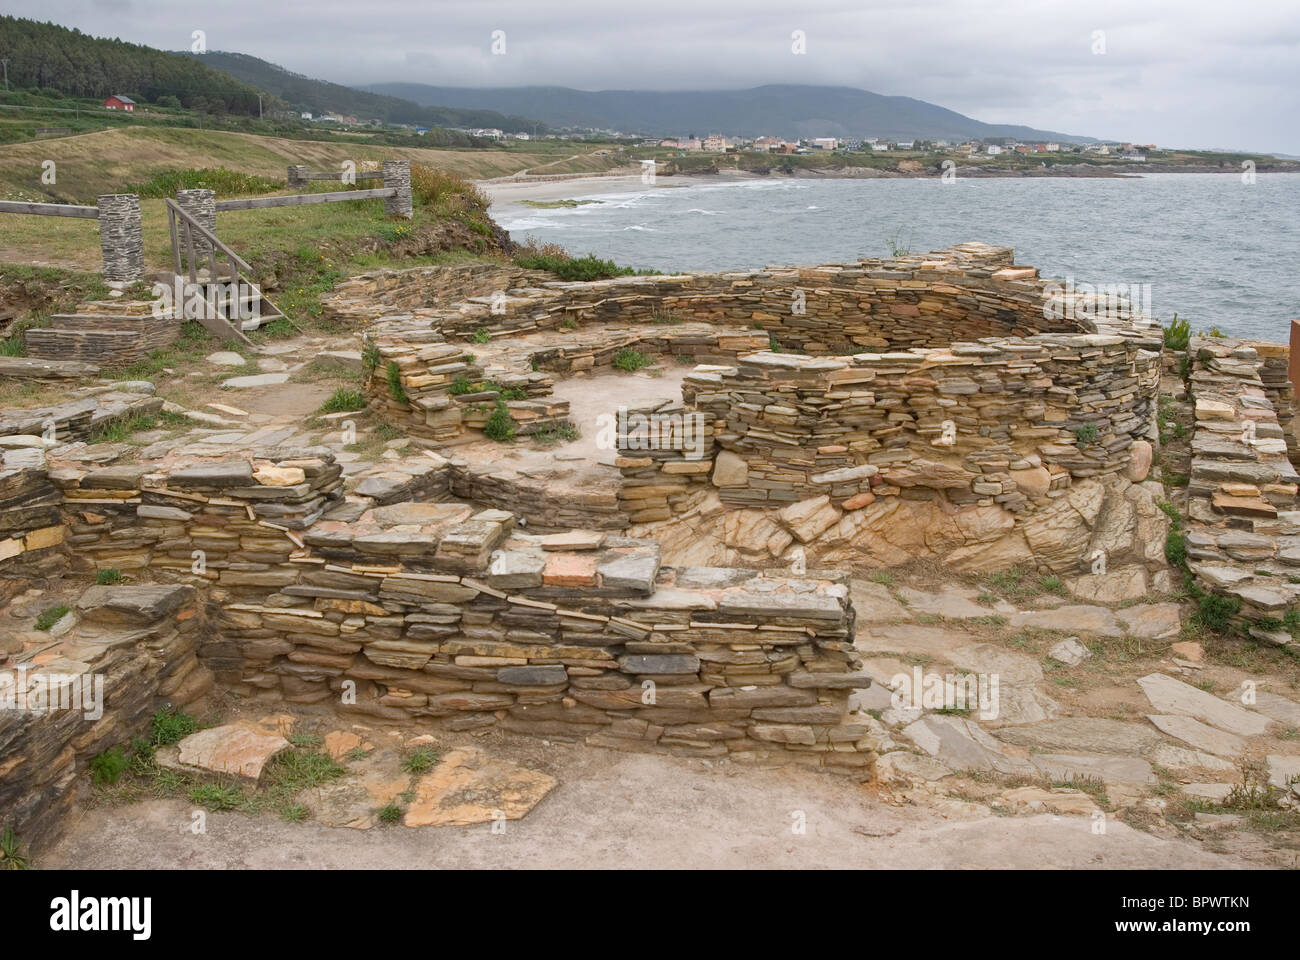 Ruins of an ancient Celtic fortified settlement. Fazouro, Galicia, Spain. Stock Photo